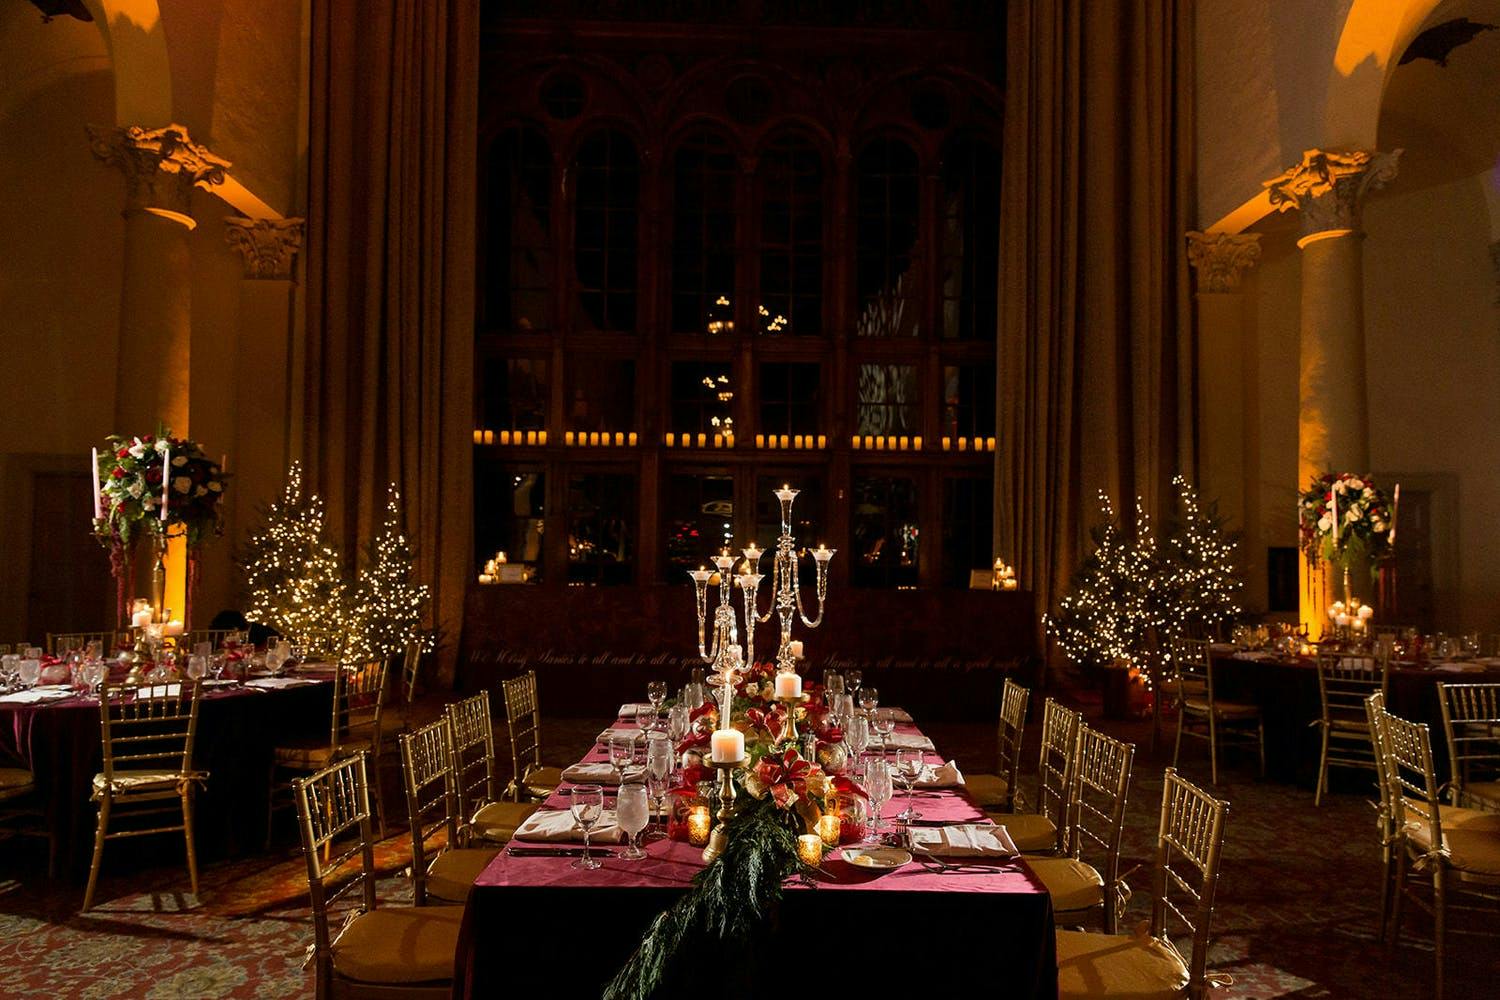 Winter wedding at Biltmore Hotel Miami Coral Gables with amber uplighting and cranberry tablescapes with glass candelabras | PartySlate